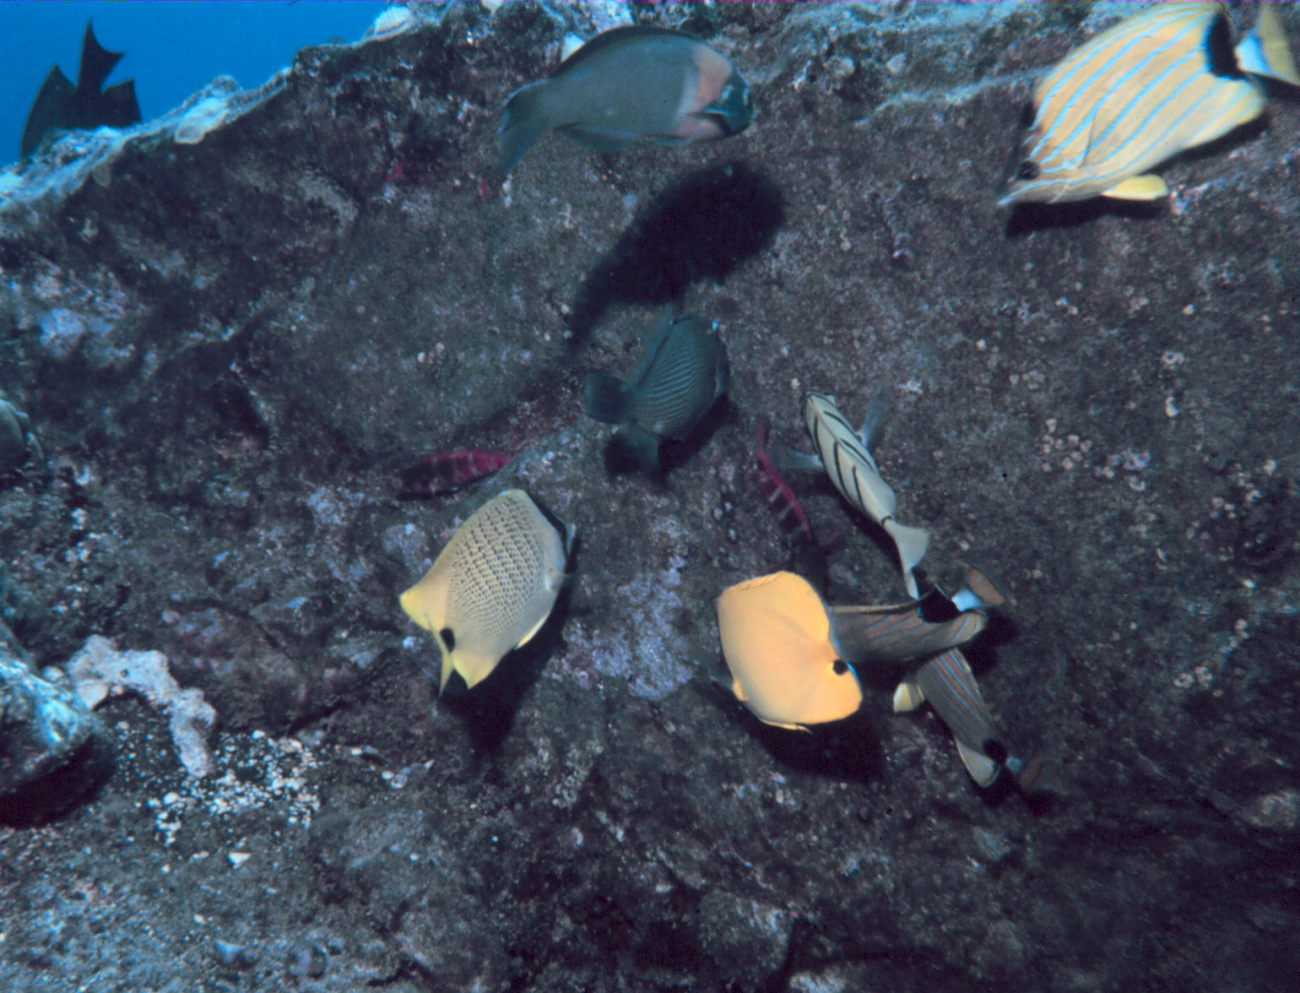 Variety of reef fish including bluestriped butterflyfish in upper right